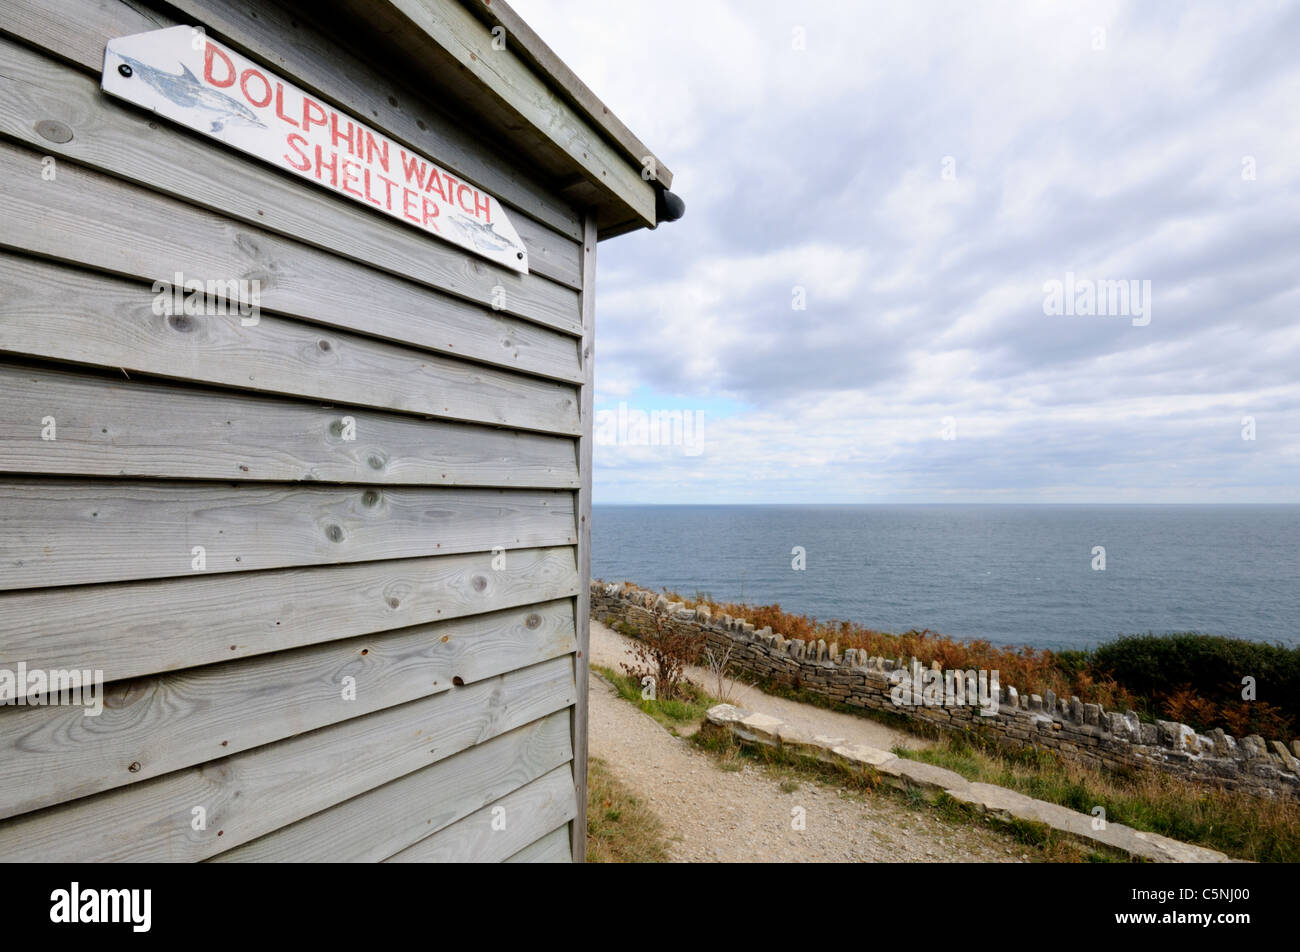 Dolphin Watch Shelter at Durlston Country Park, Swanage in Dorset Stock Photo